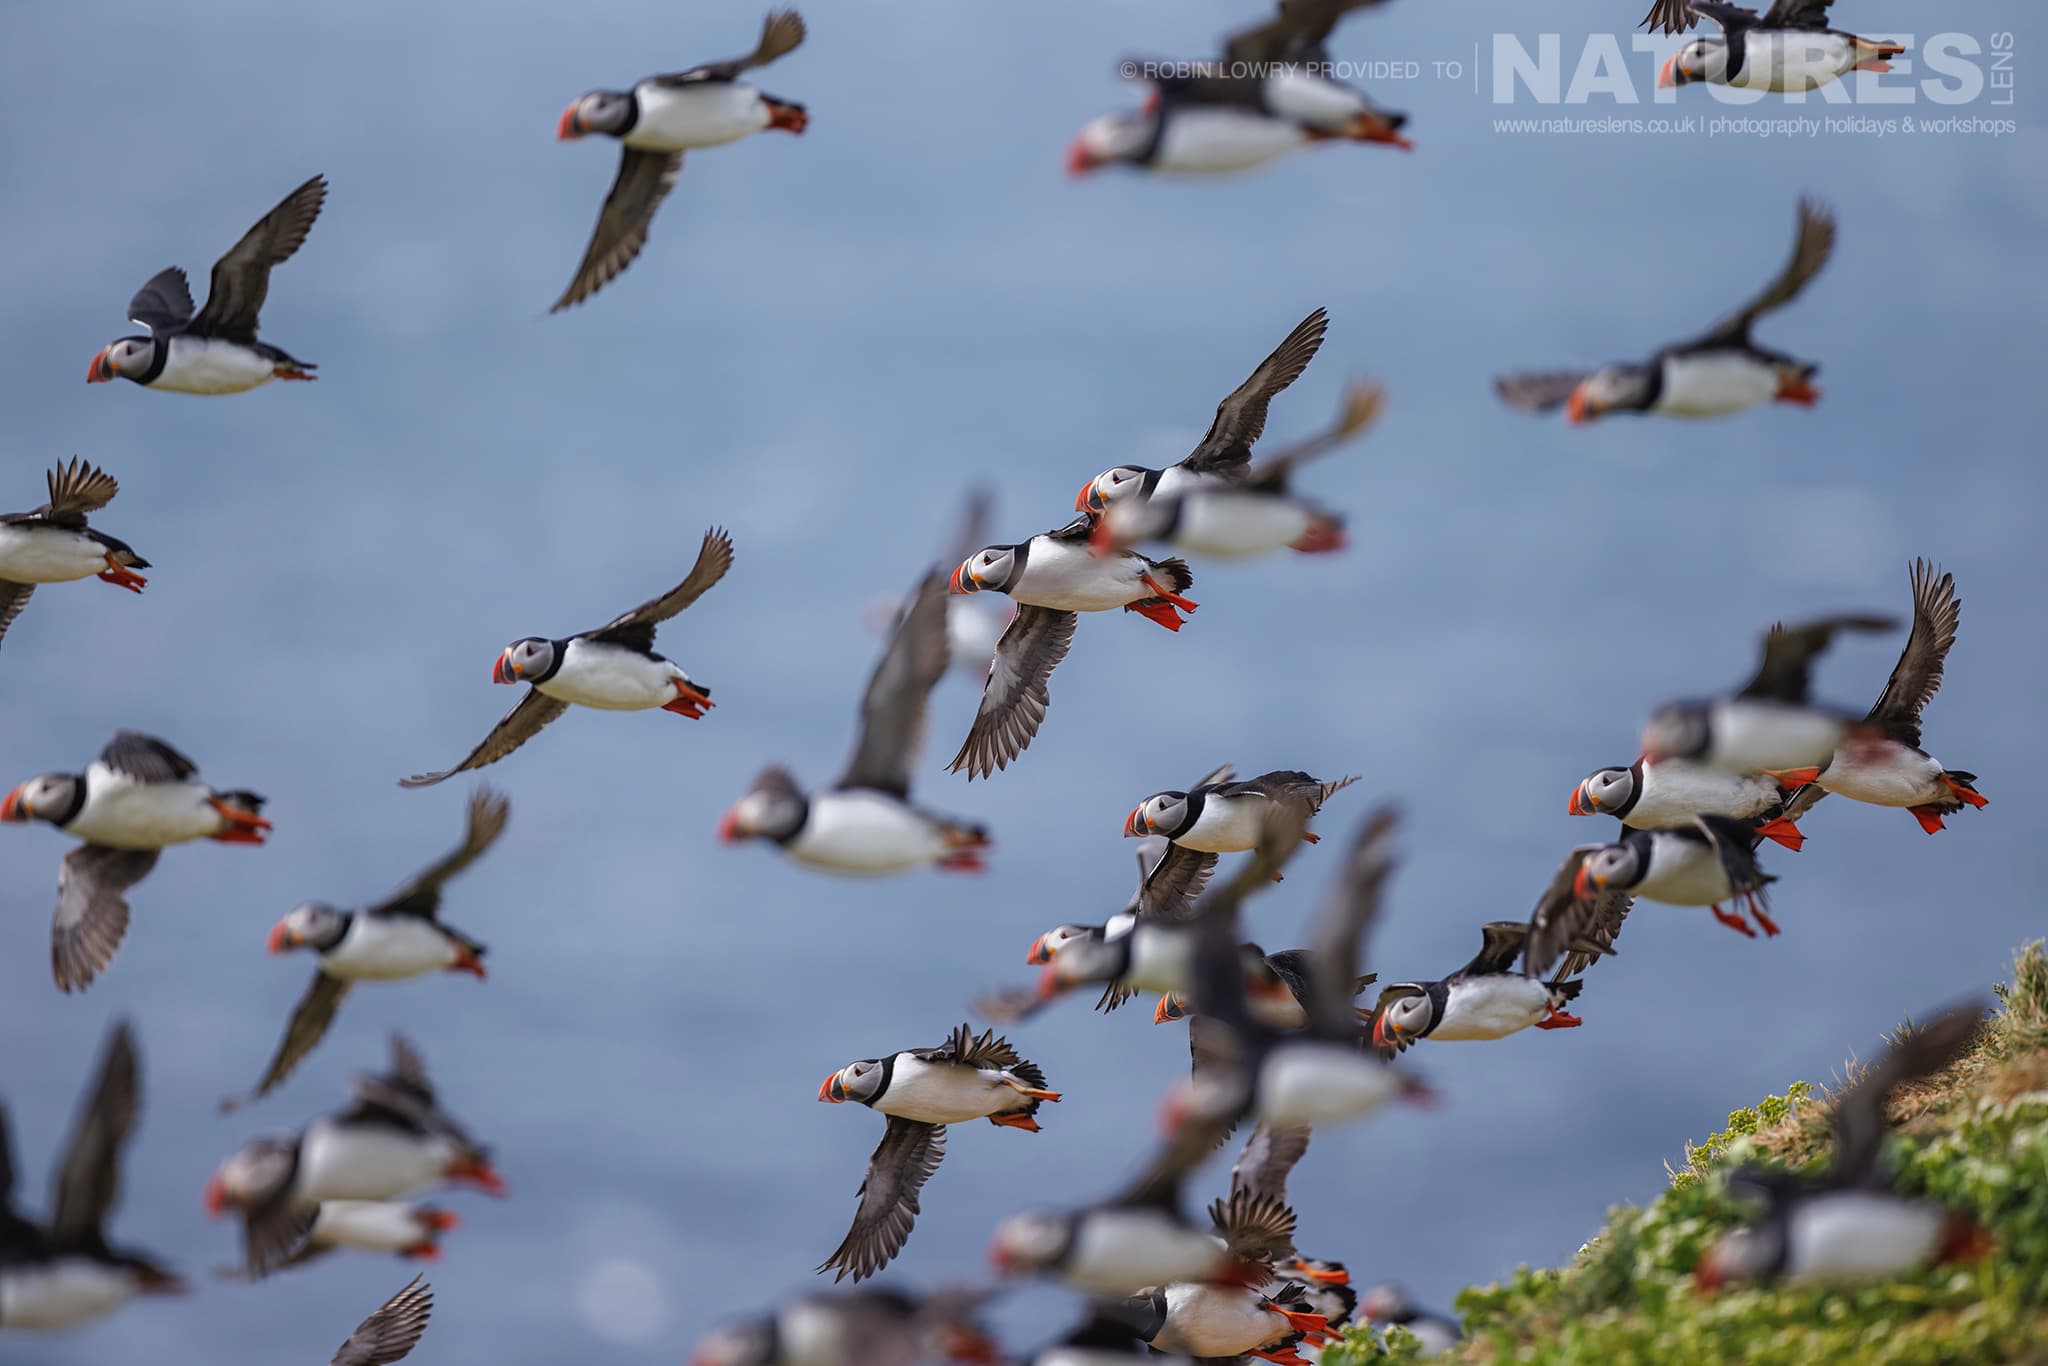 A Mass Of Puffins Taking Flight From The Atlantic Puffin Colony Of Grímsey Island